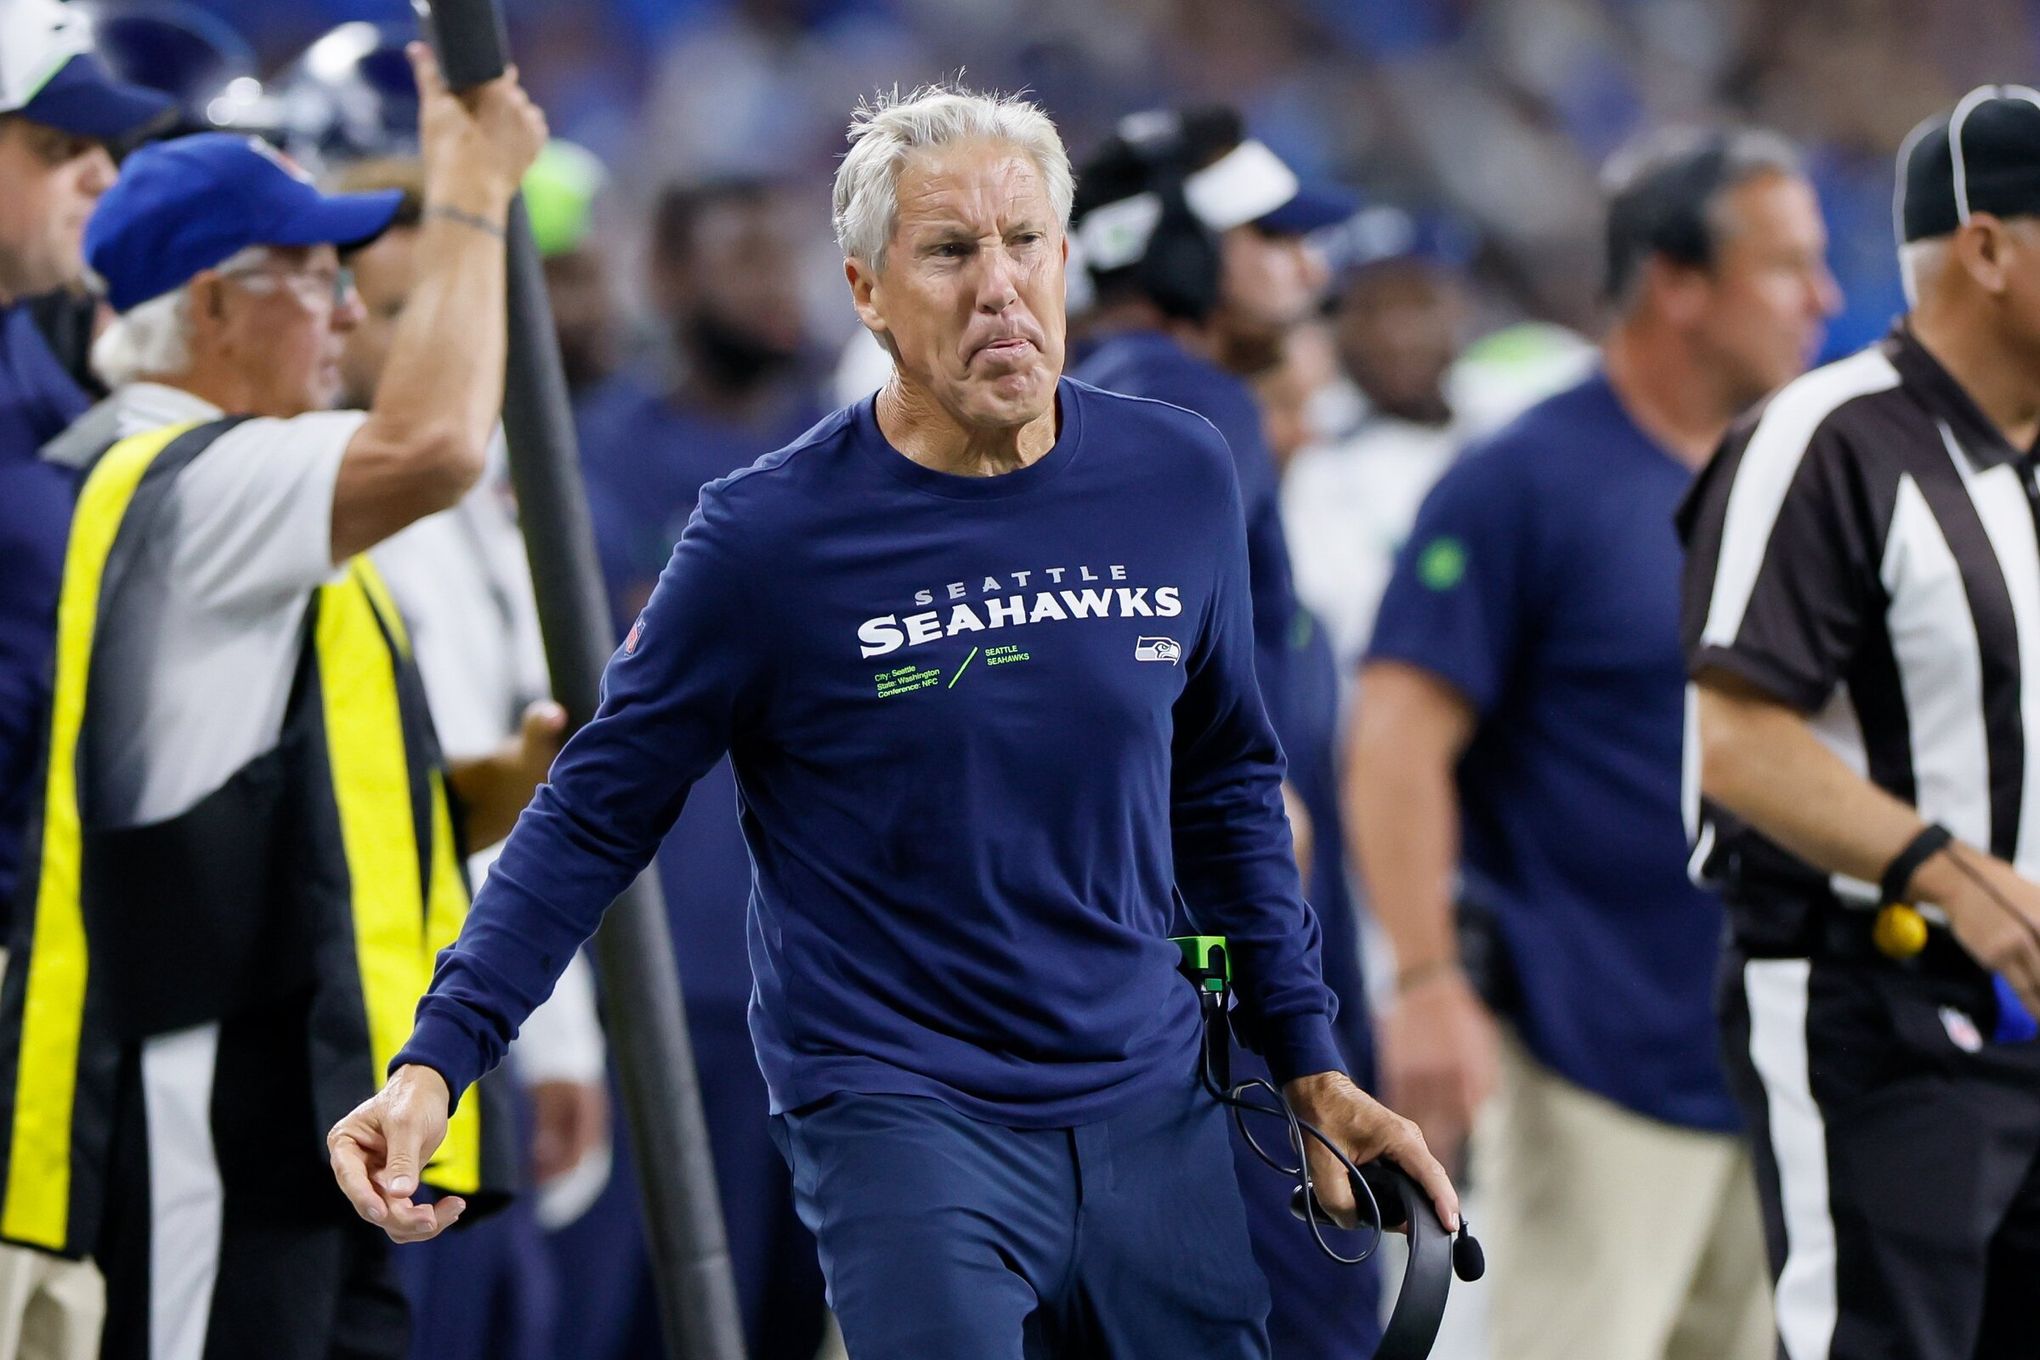 Seahawks head to New York to show again they're kings of Monday night